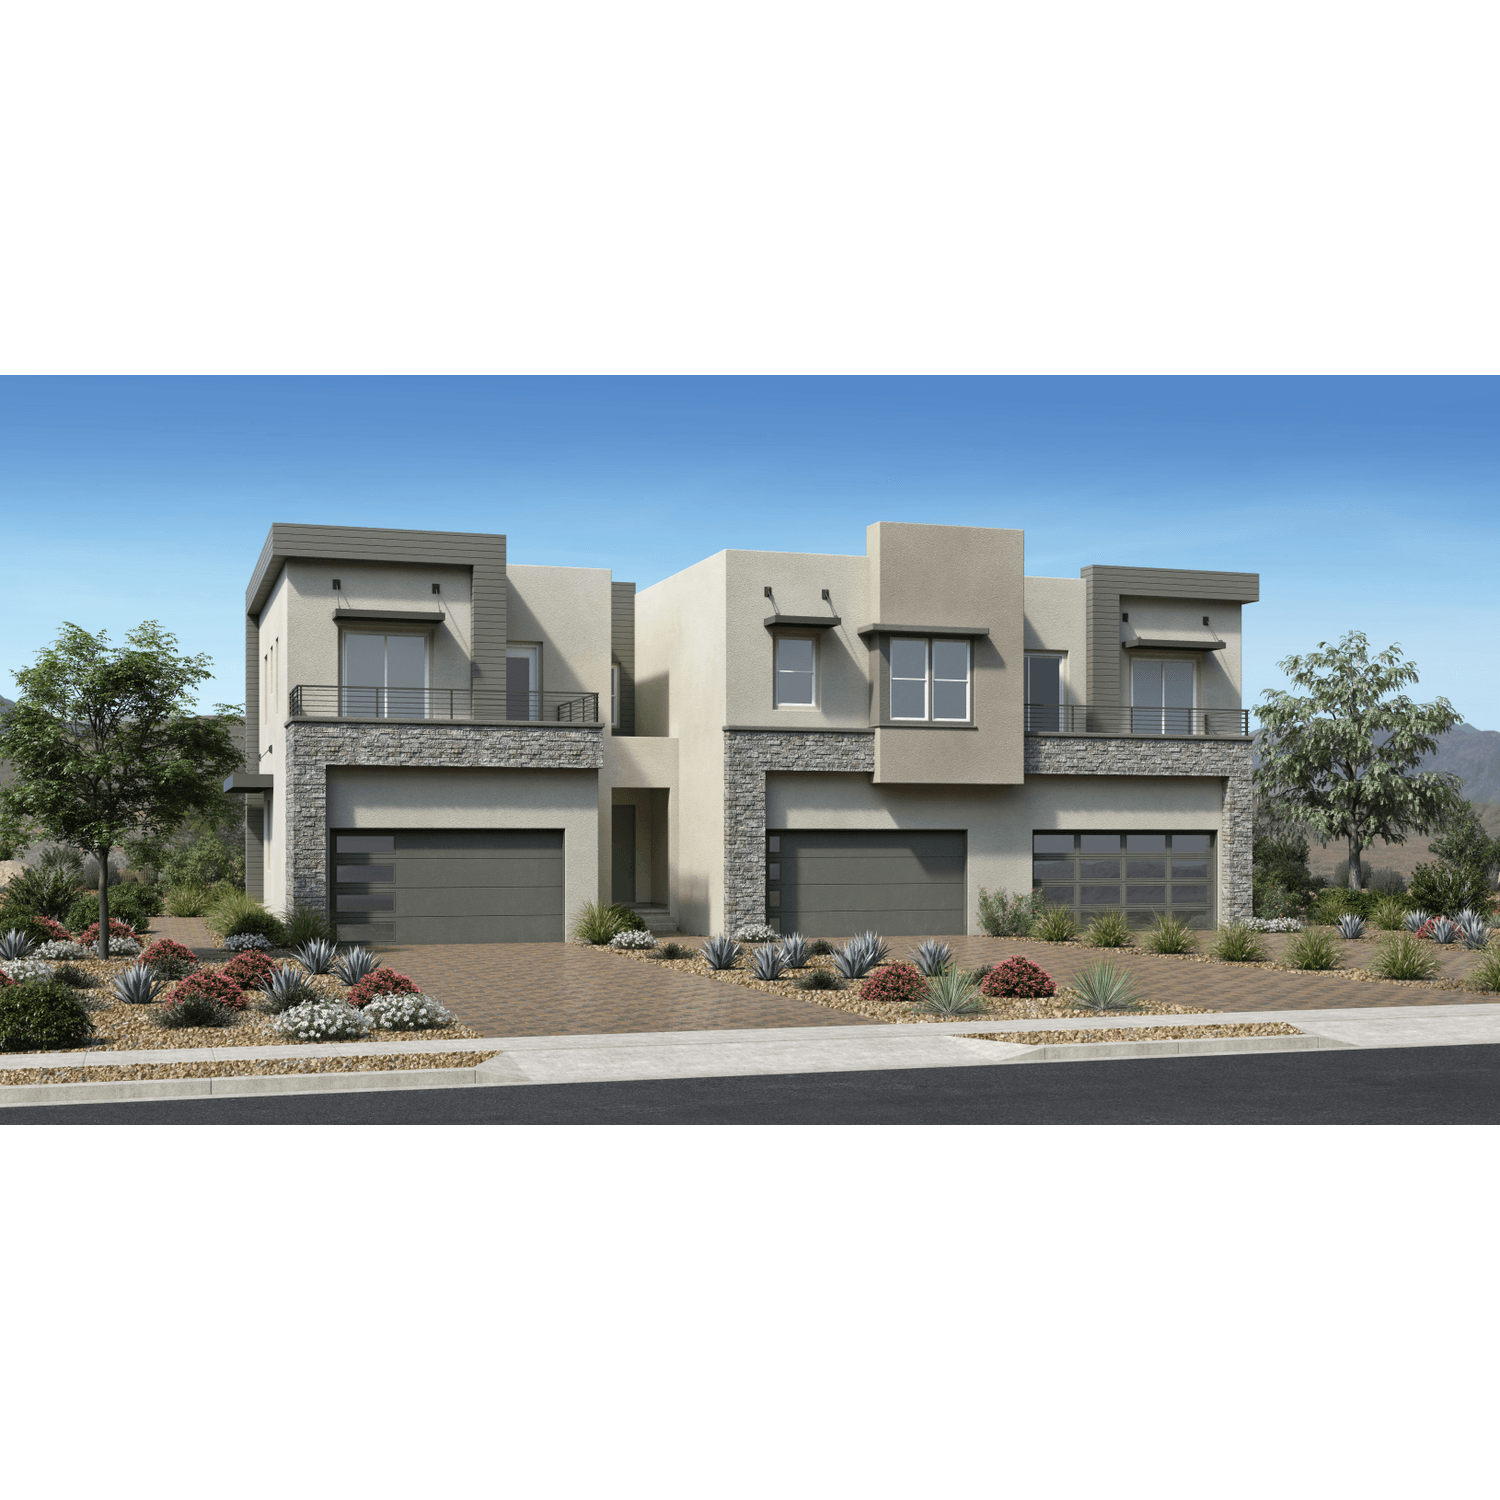 Hilltop by Toll Brothers building at Plumas St At Golf Club Dr, Reno, NV 89509